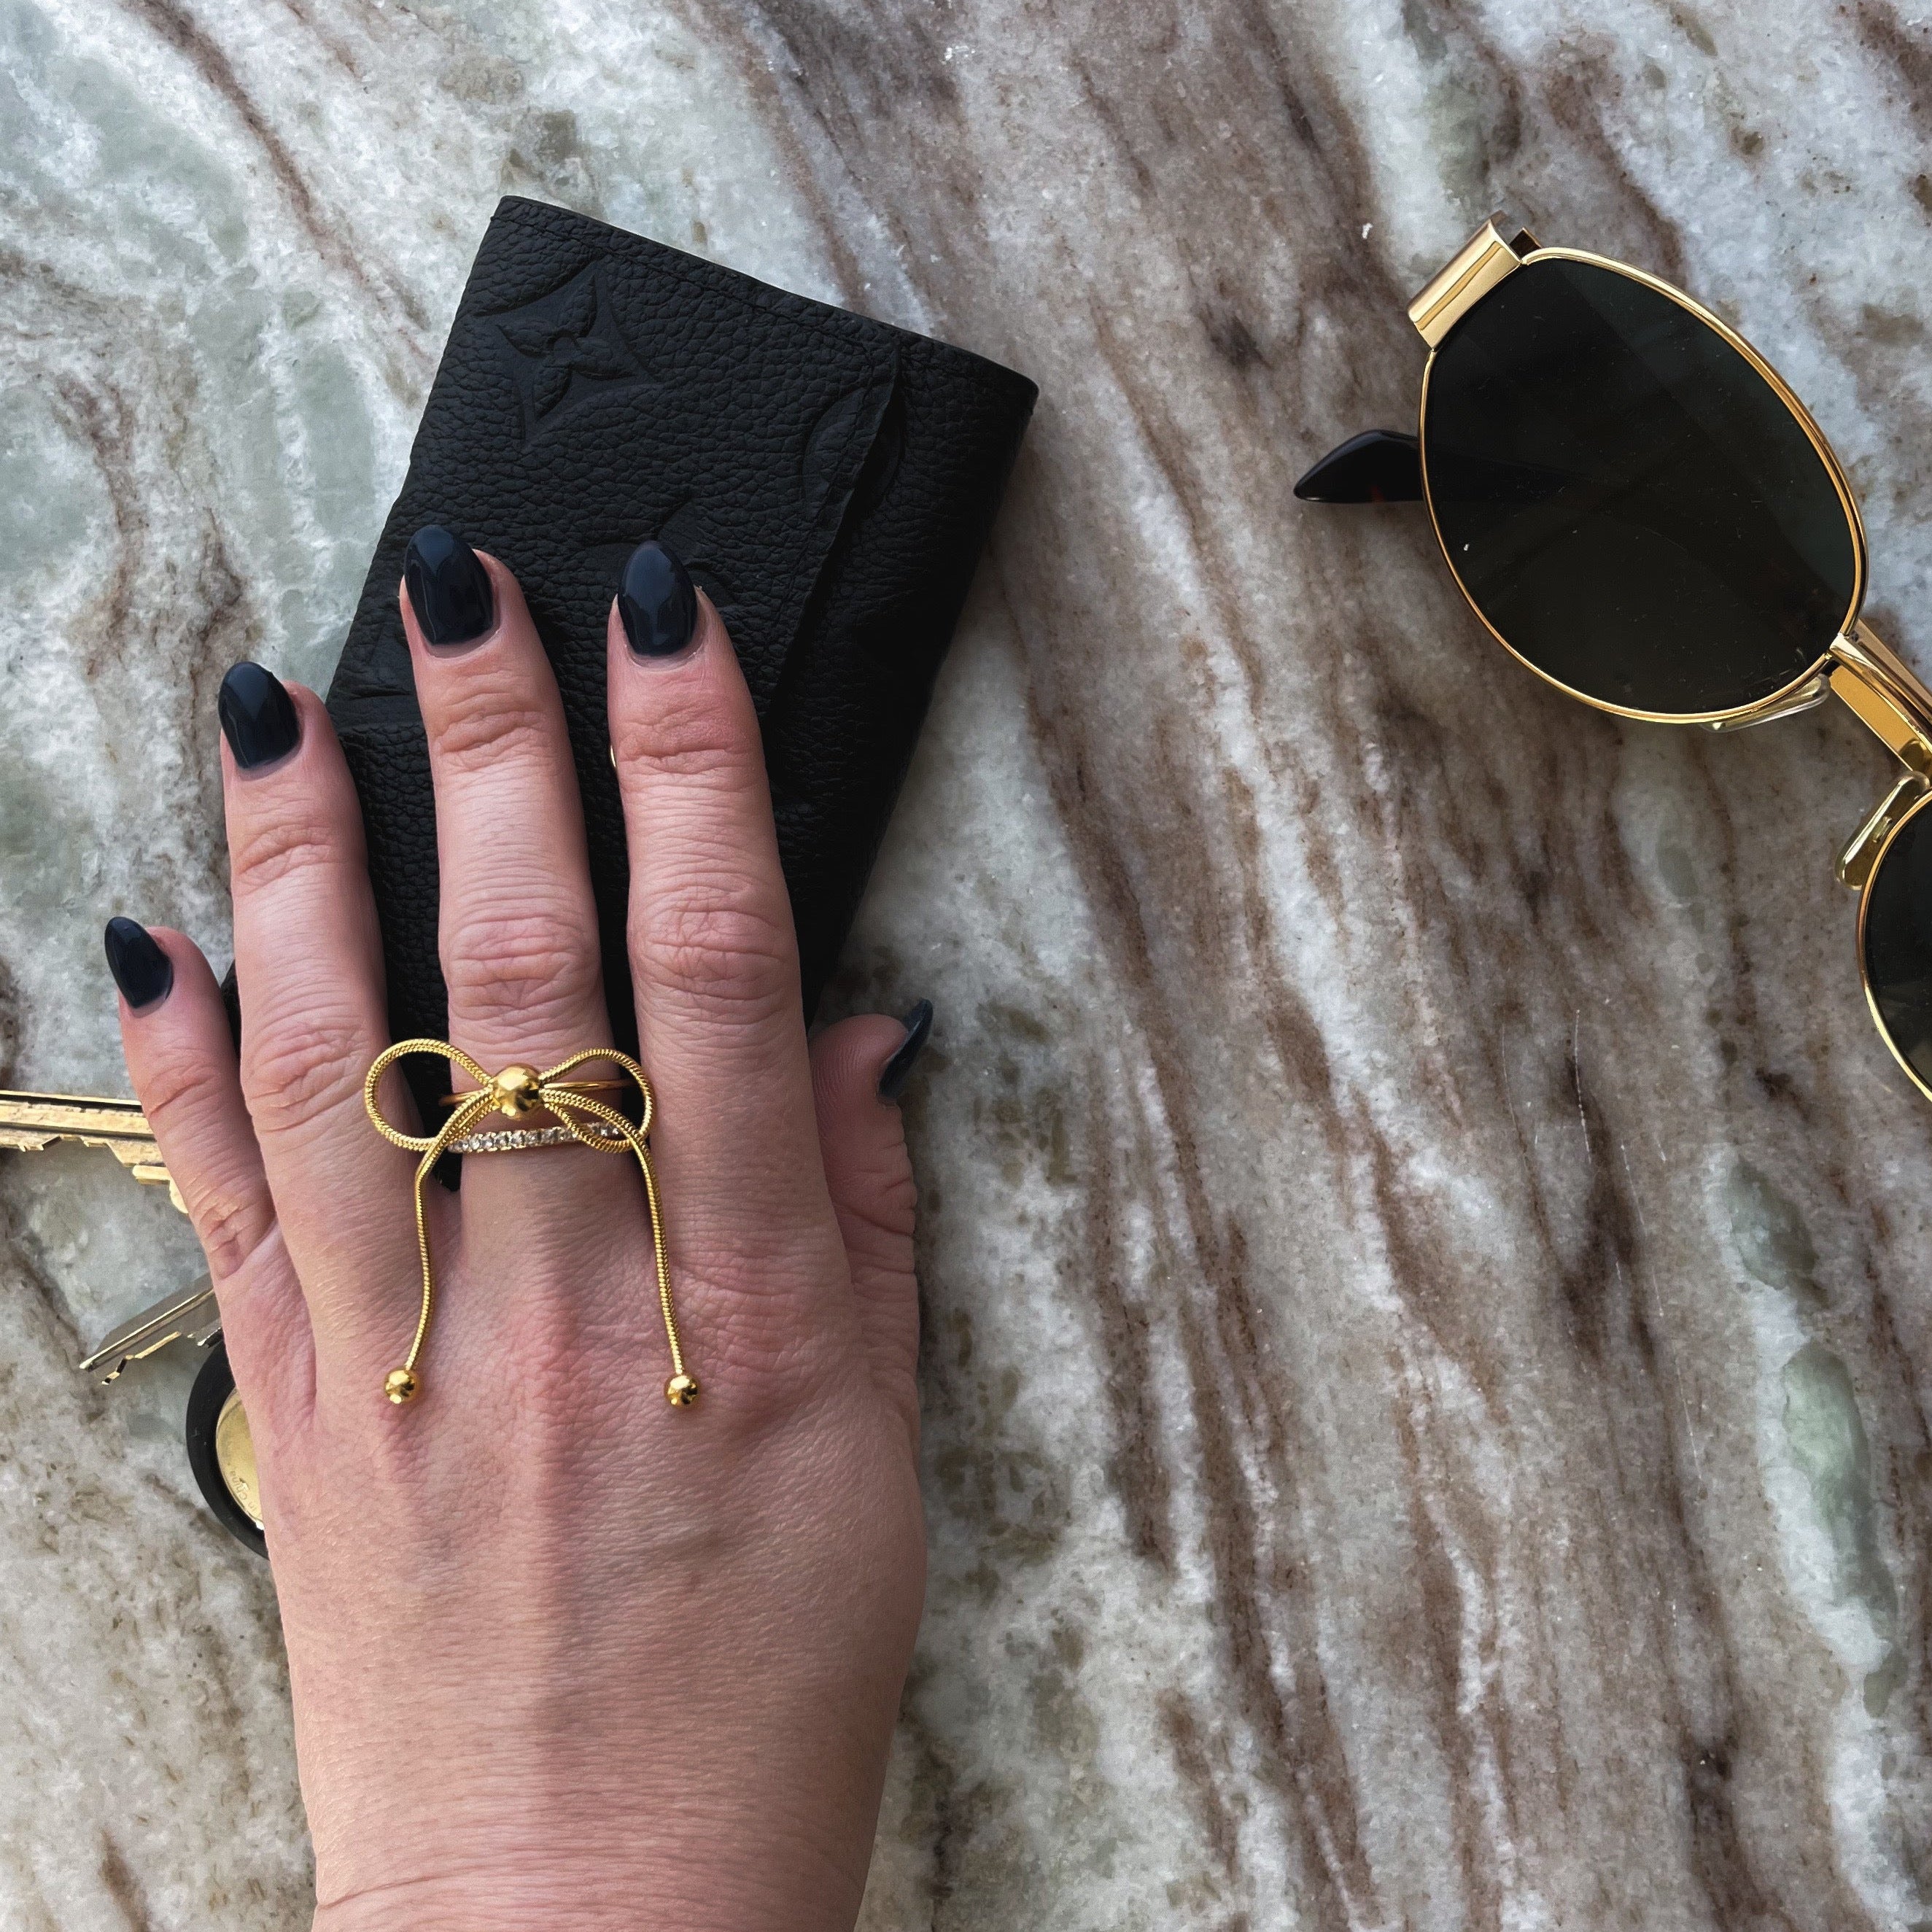 Gold bow ring on hand grabbing wallet and sunglasses